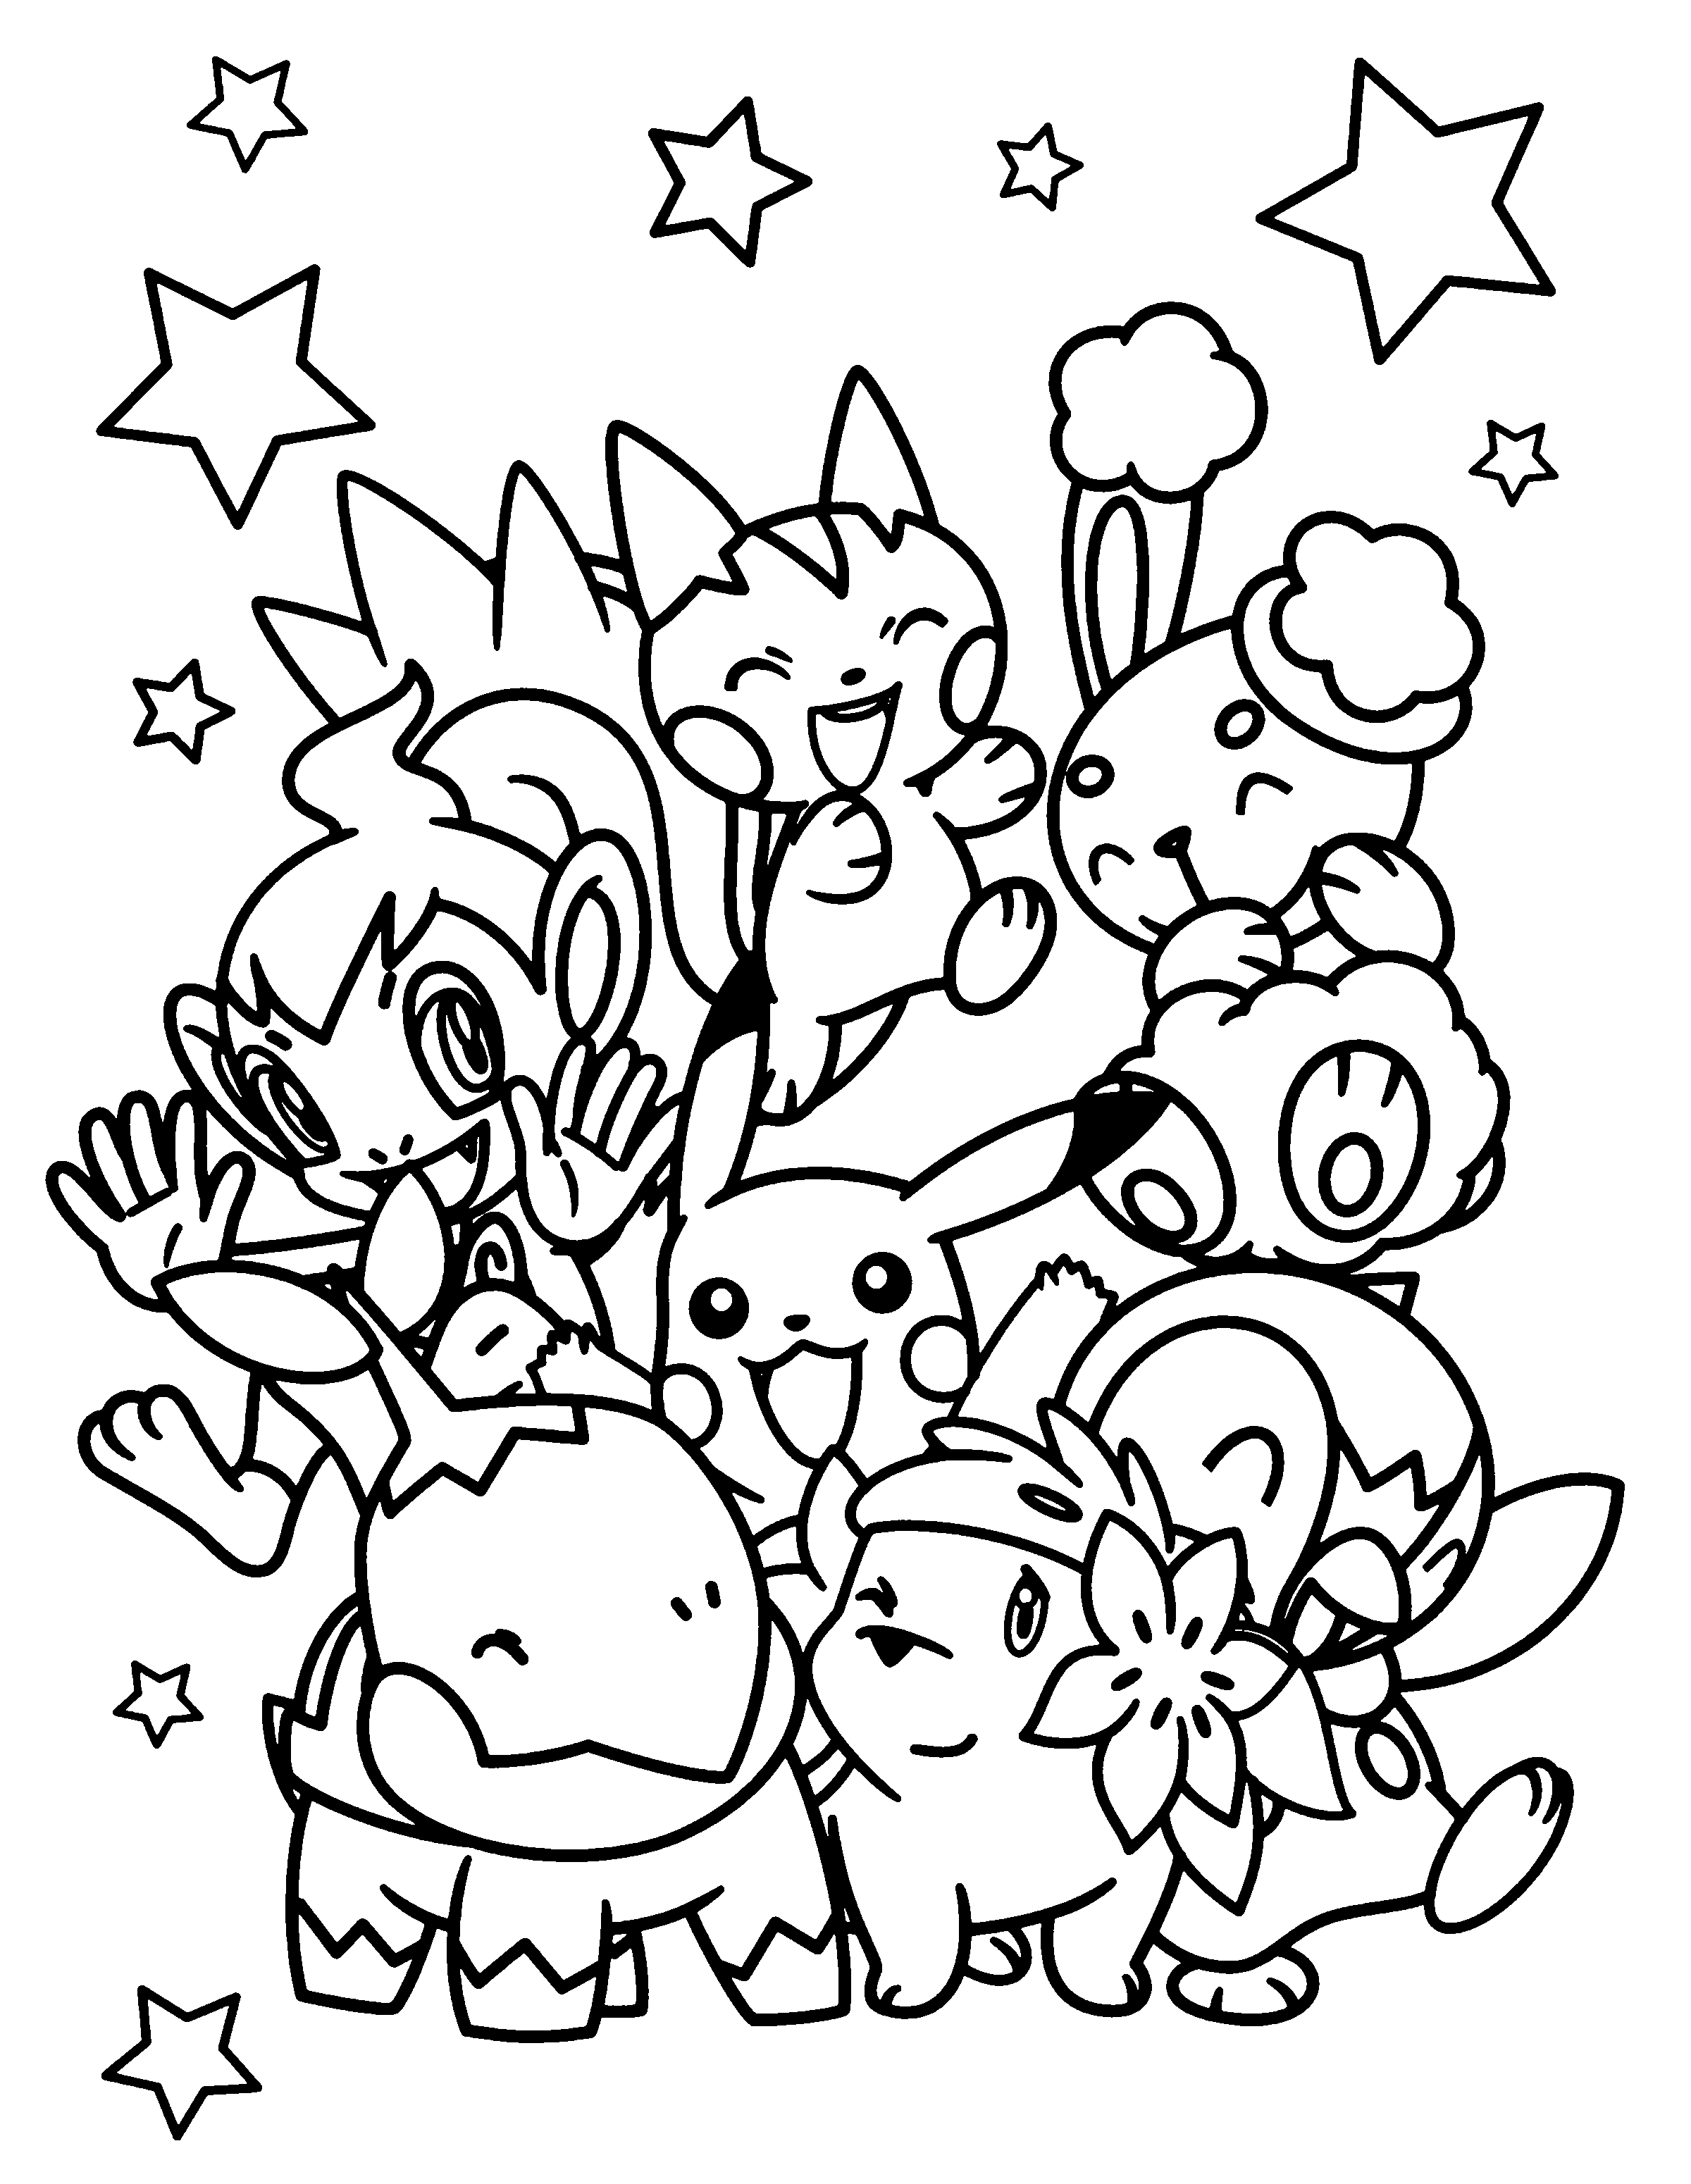 Pokemon 20 For Kids Coloring Pages   Coloring Cool